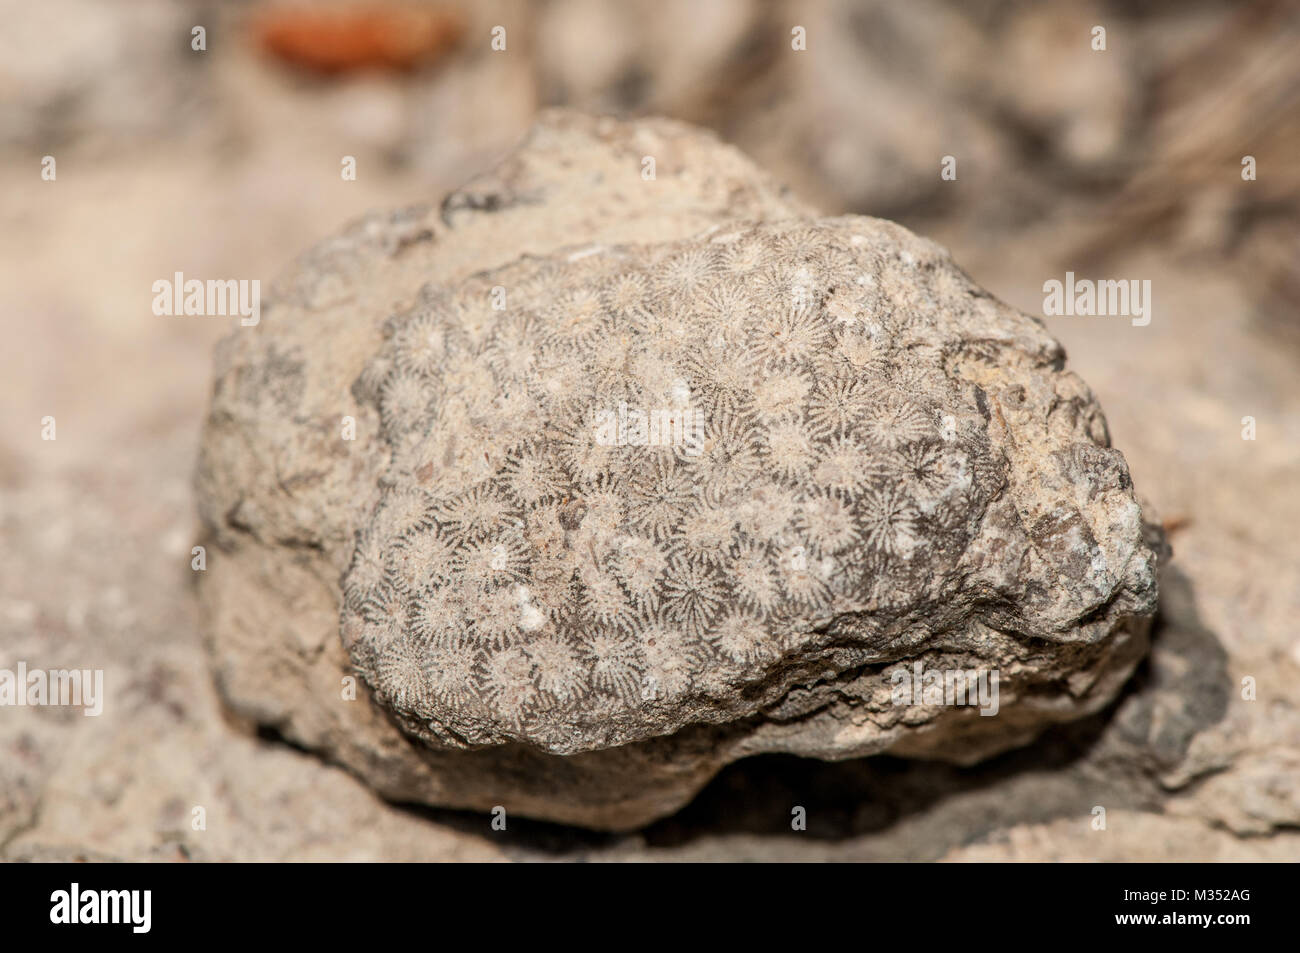 close-up view of marine fossils on the field Stock Photo